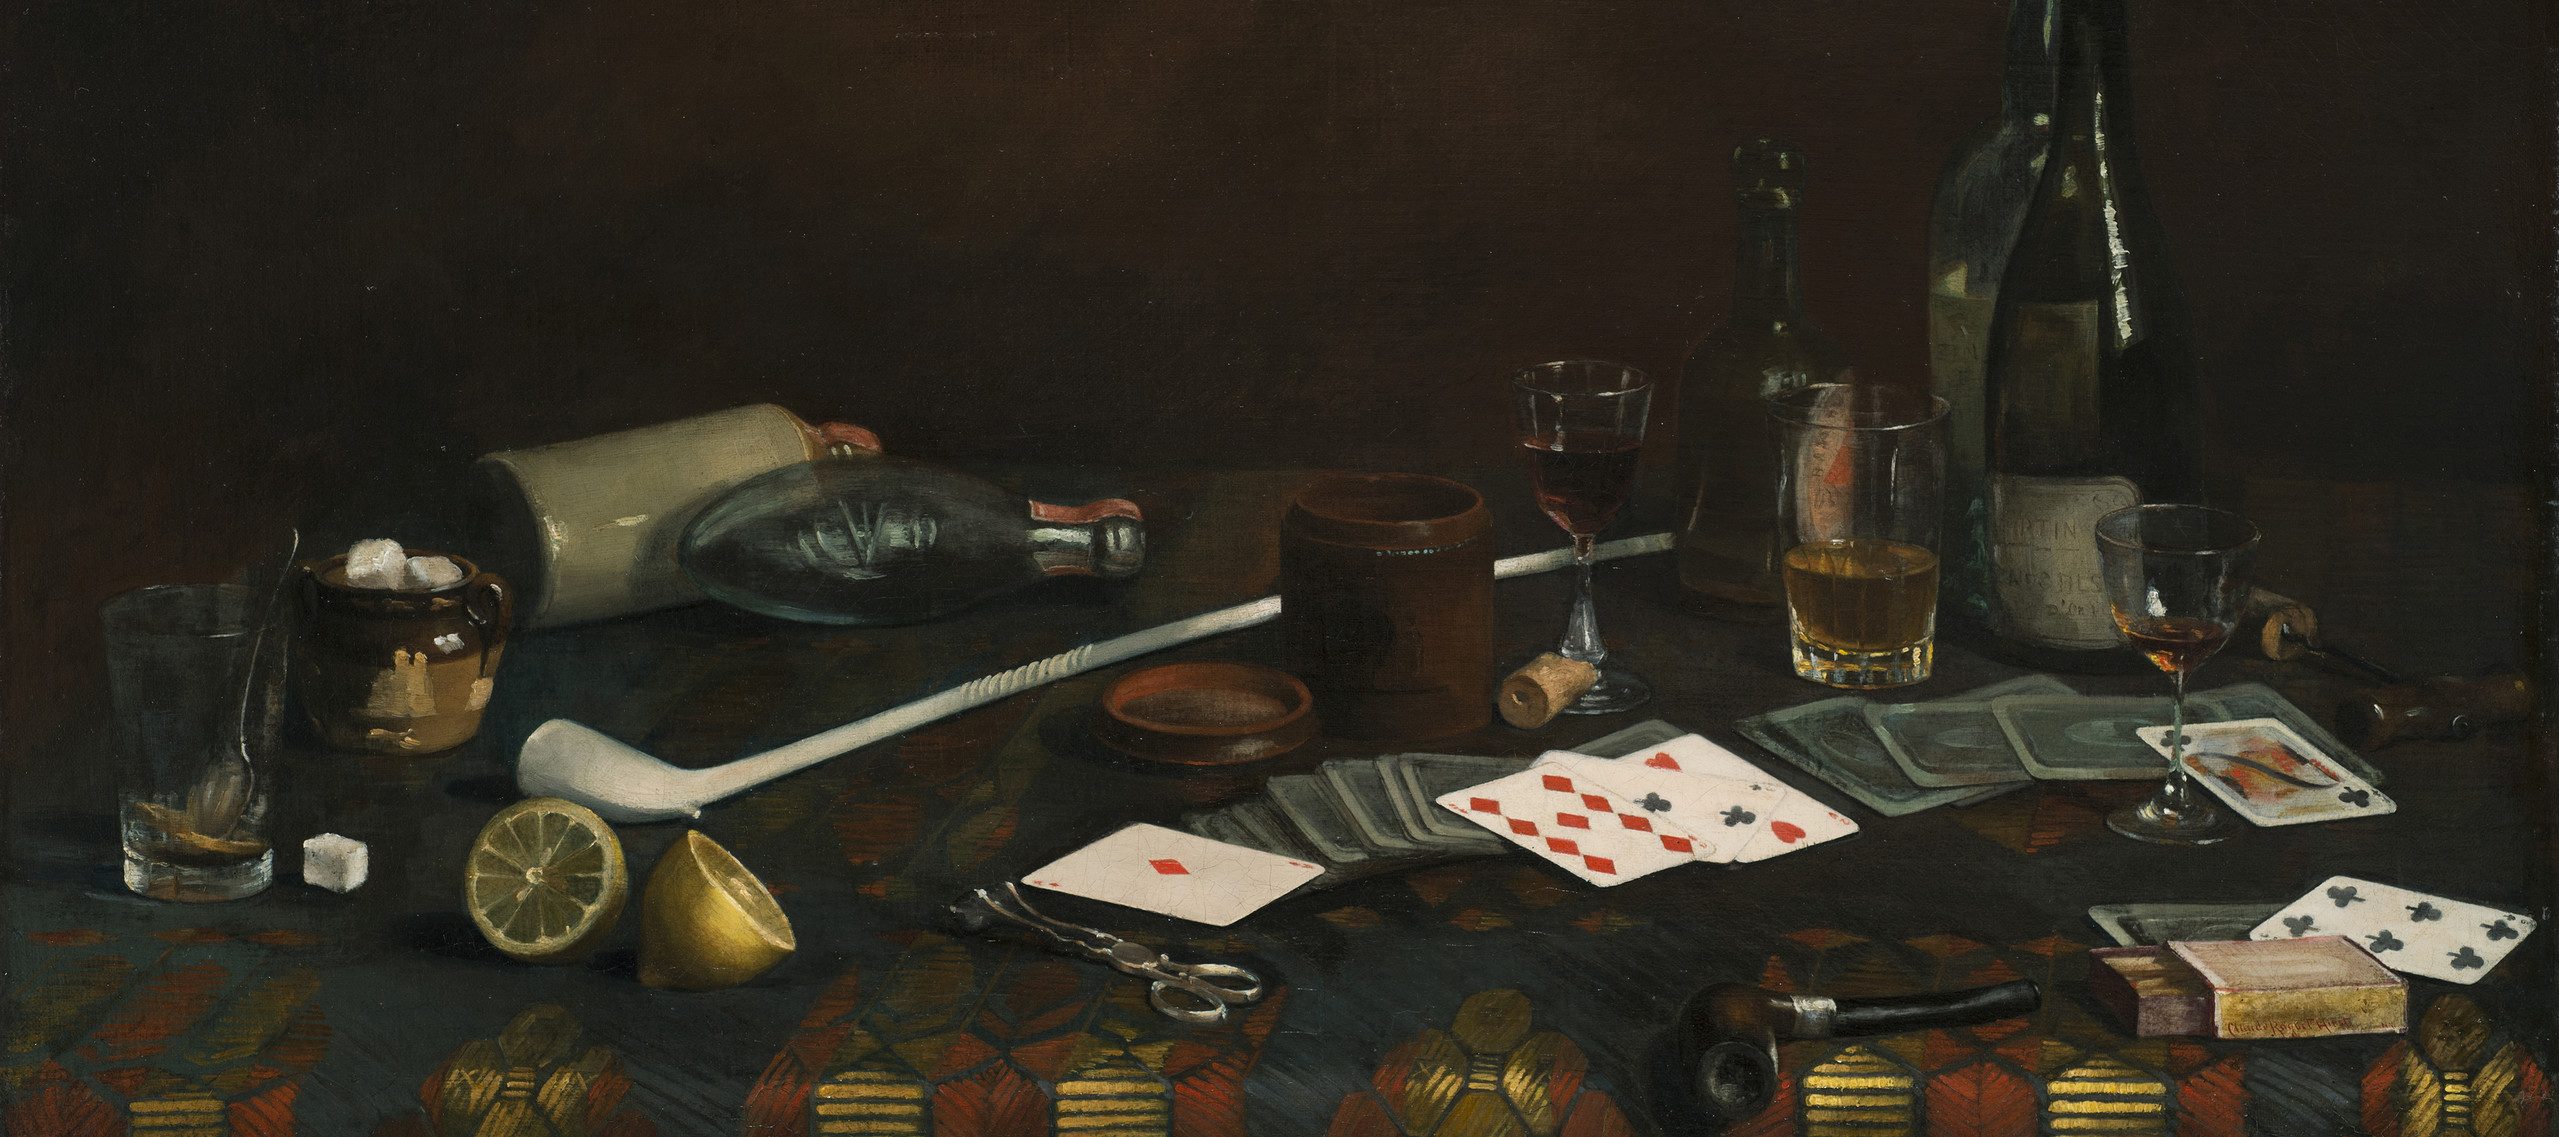 Painting of a blue tablecloth with gold and red pattern. Strewn across the top are half-empty glasses of wine and brown liquid, playing cards, lemon halves and matches. Two pipes, one long and white, one small and dark, lie next to a container of sugar cubes, corks, and bottles.